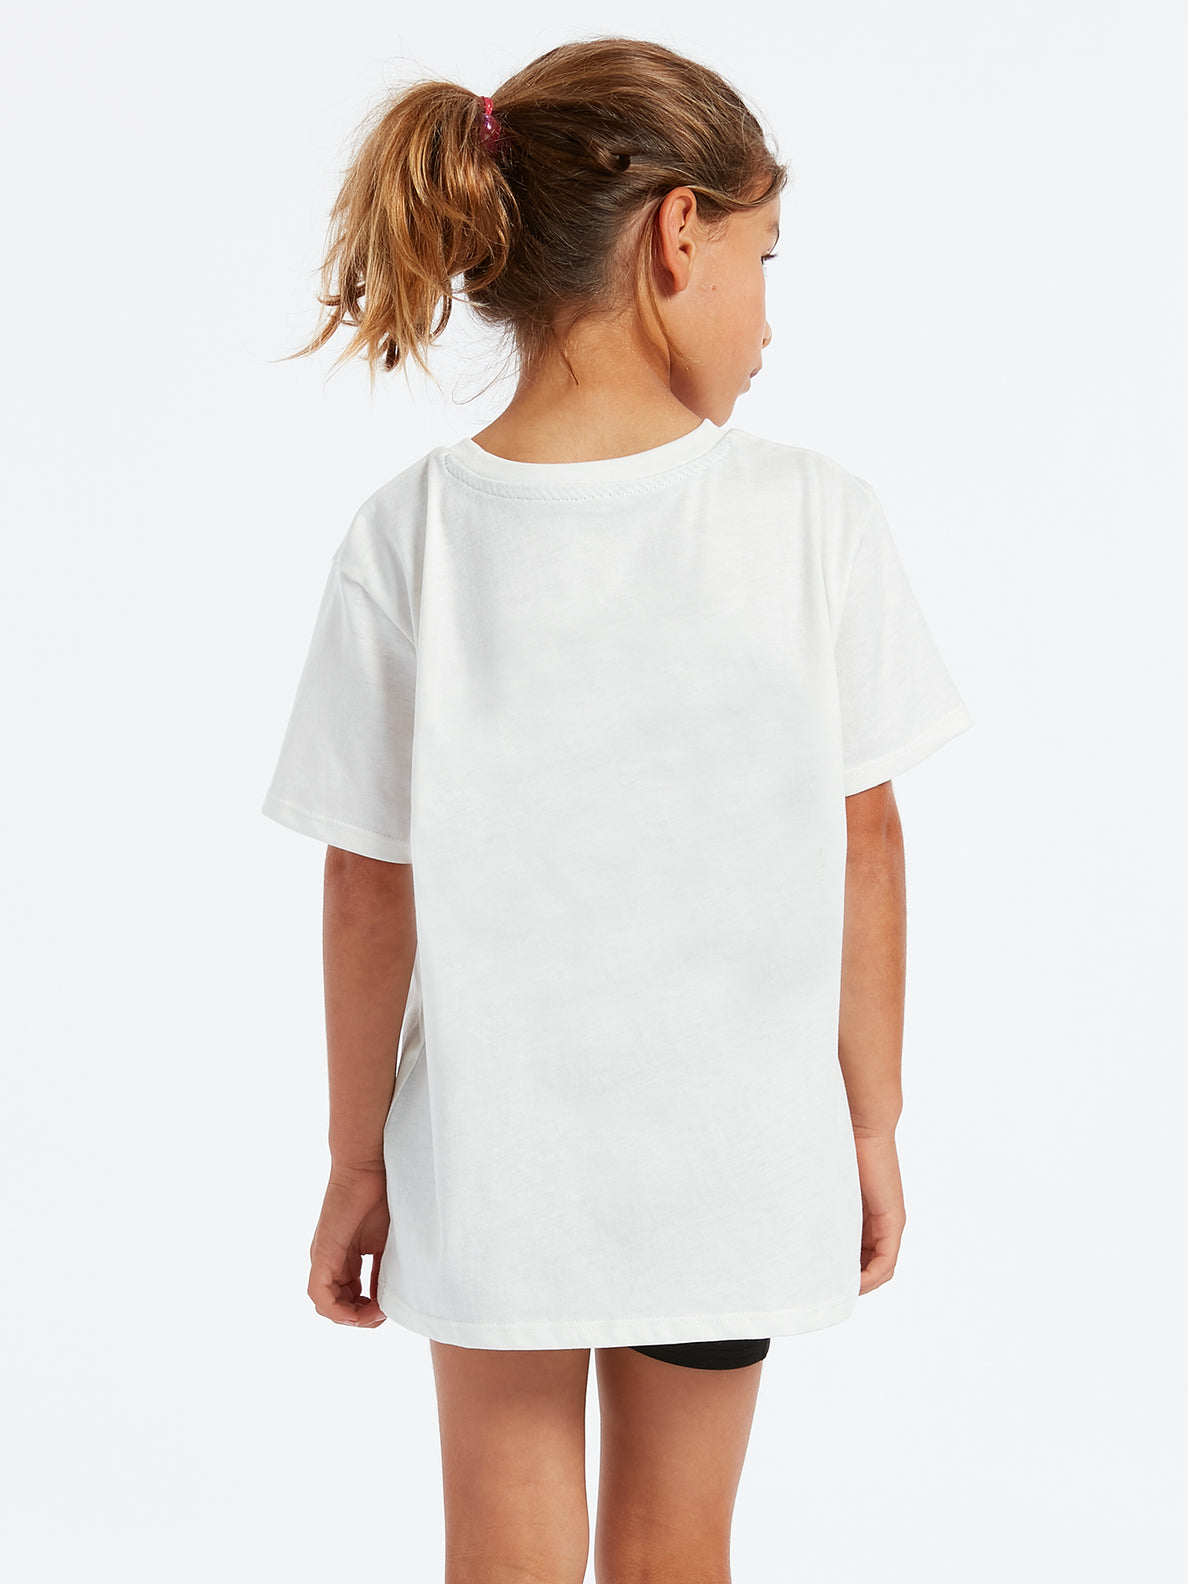 Big Girls Last Party Tee - Star White (R3522200_SWH1) [B]